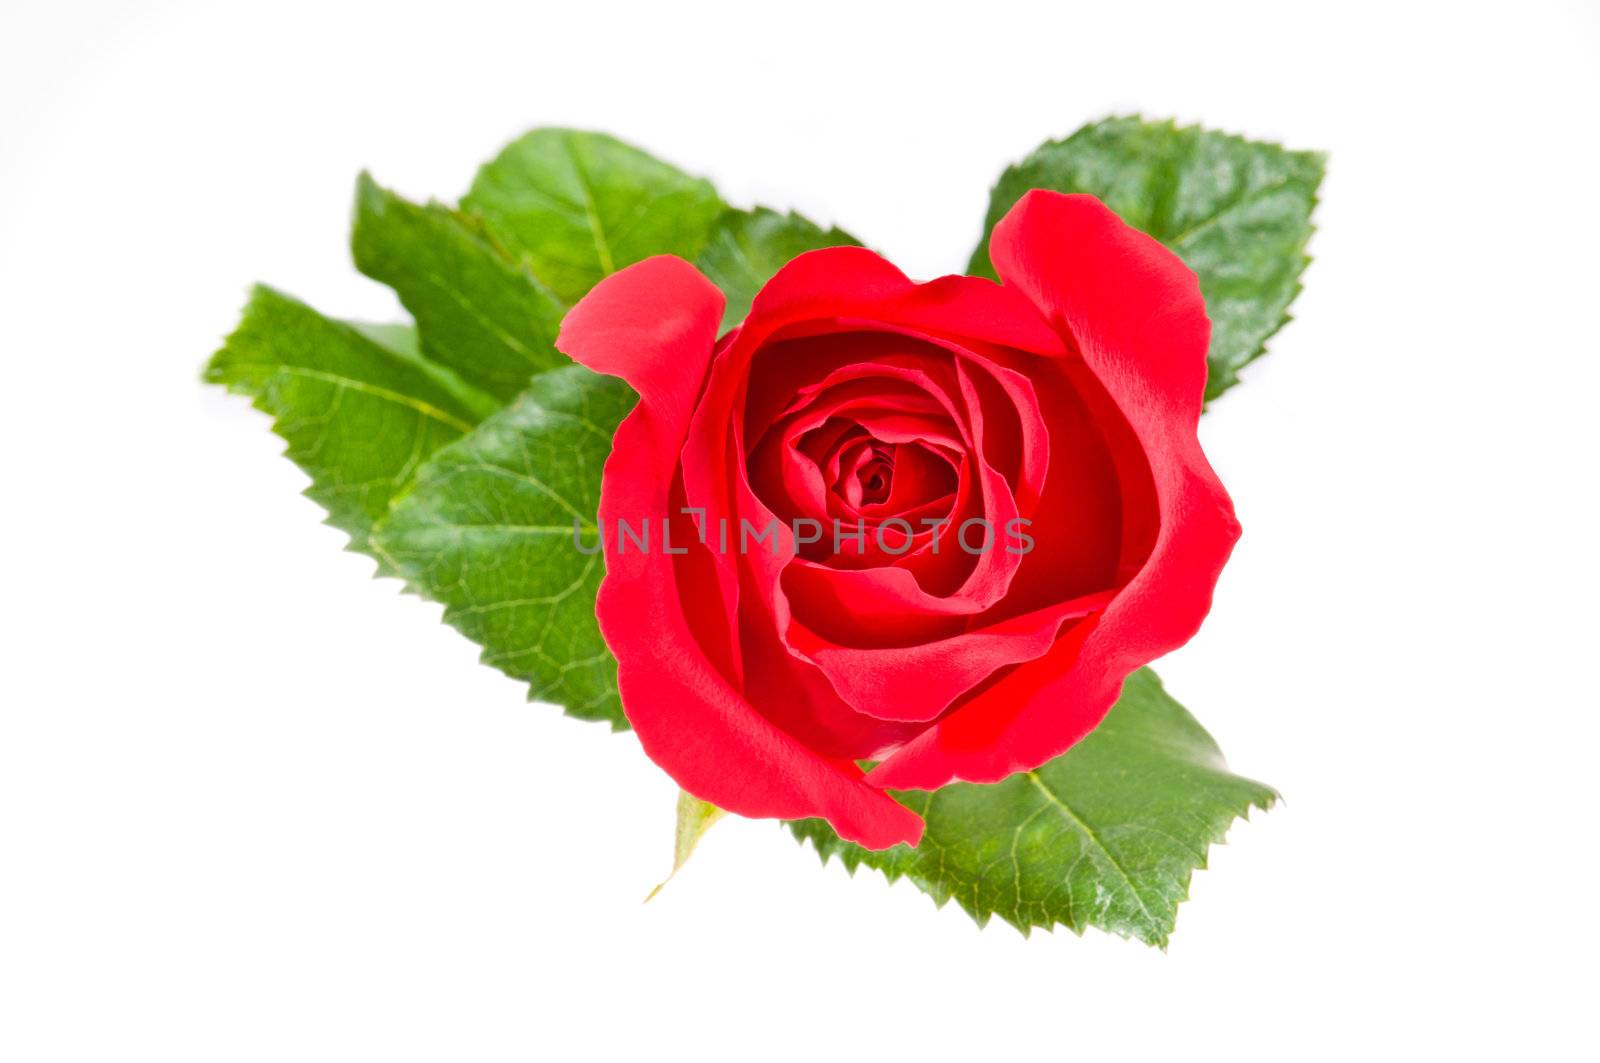 Beautiful red rose over white with green leaves